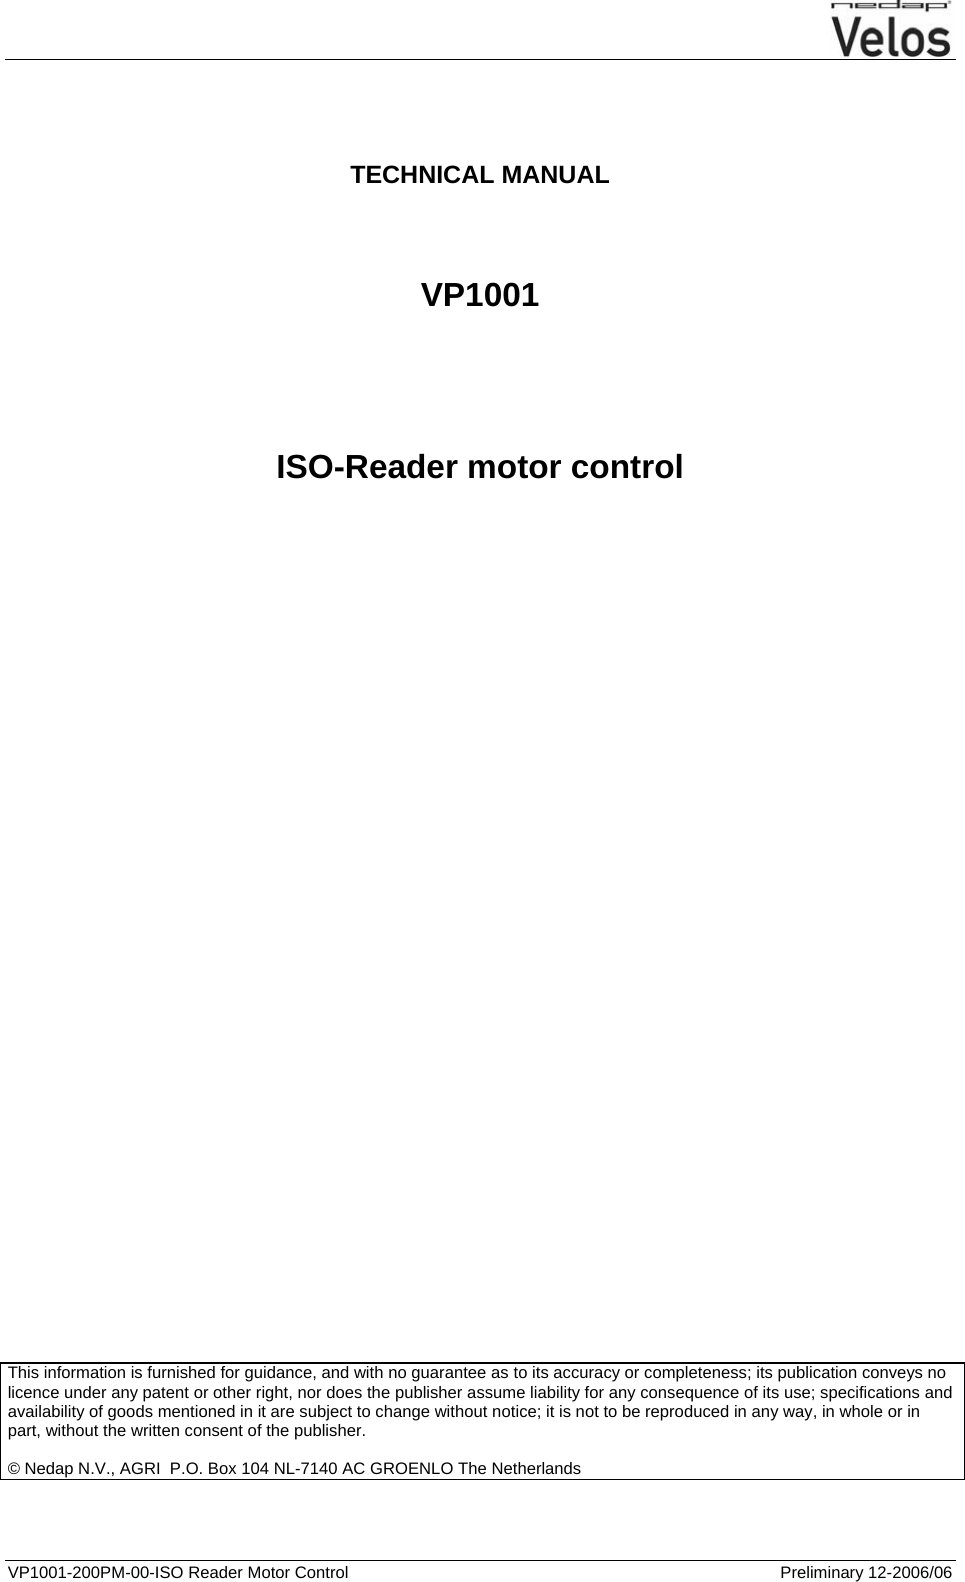  VP1001-200PM-00-ISO Reader Motor Control  Preliminary 12-2006/06      TECHNICAL MANUAL    VP1001      ISO-Reader motor control                                     This information is furnished for guidance, and with no guarantee as to its accuracy or completeness; its publication conveys no licence under any patent or other right, nor does the publisher assume liability for any consequence of its use; specifications and availability of goods mentioned in it are subject to change without notice; it is not to be reproduced in any way, in whole or in part, without the written consent of the publisher.  © Nedap N.V., AGRI  P.O. Box 104 NL-7140 AC GROENLO The Netherlands     